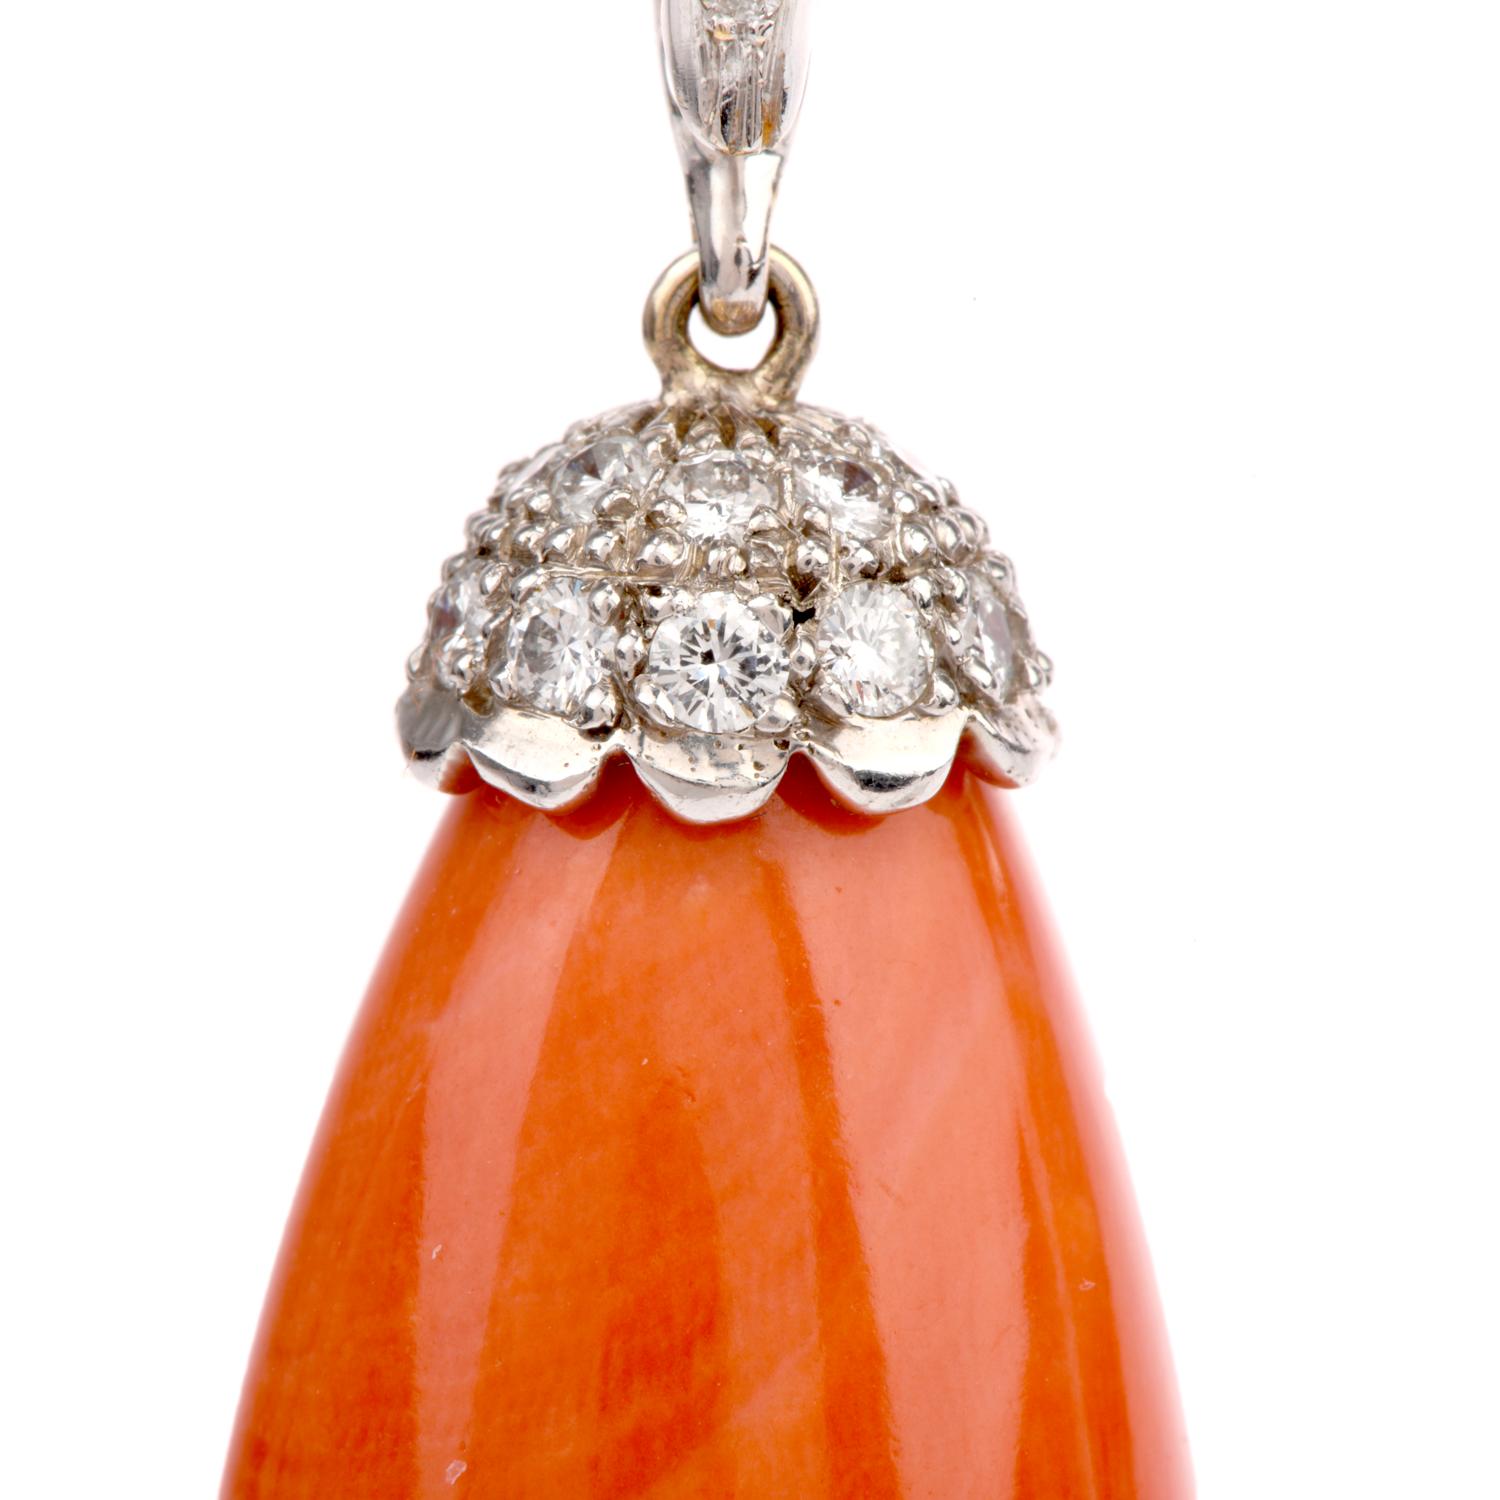 This sensual Red Coral piece was designed universally

as a Pendant or Enhancer.  This can easily be worn alone suspended on 

an elegant chain or opened and clipped around a strand of Pearls or your favorite

beads.  Crafted in 18K white gold.  The